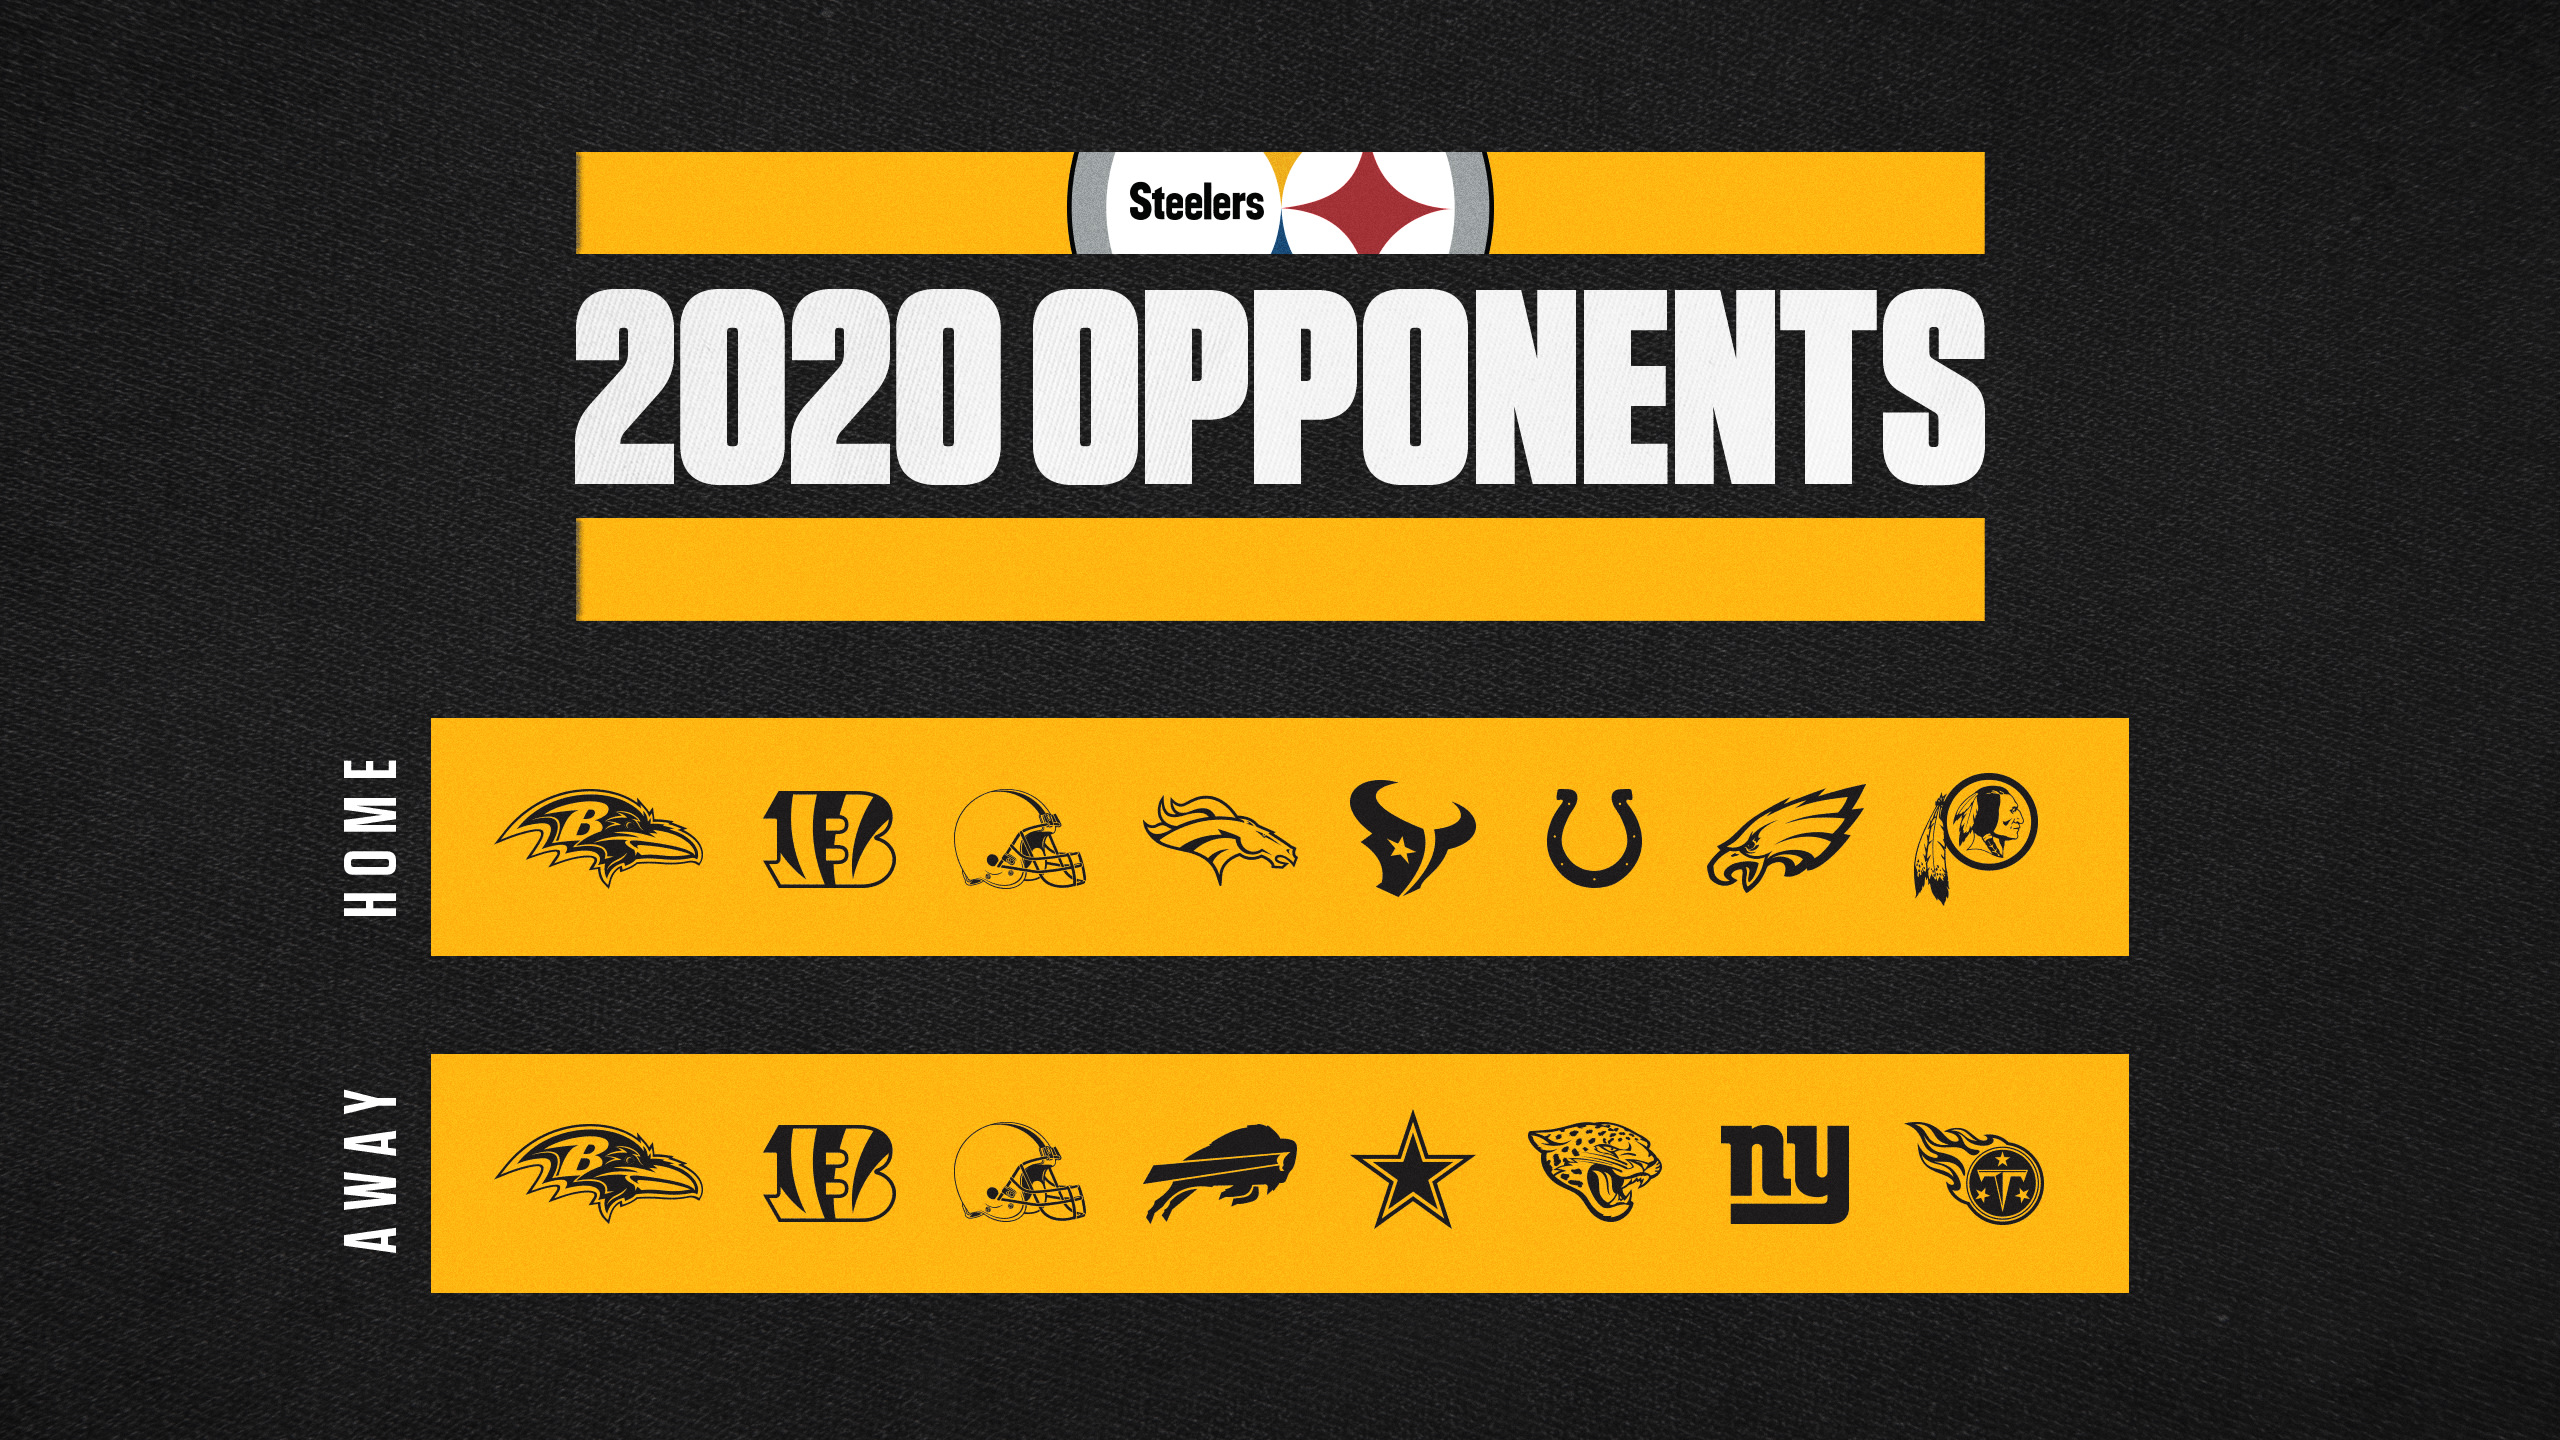 2020 Opponents Pittsburgh Steelers Schedule 2020 